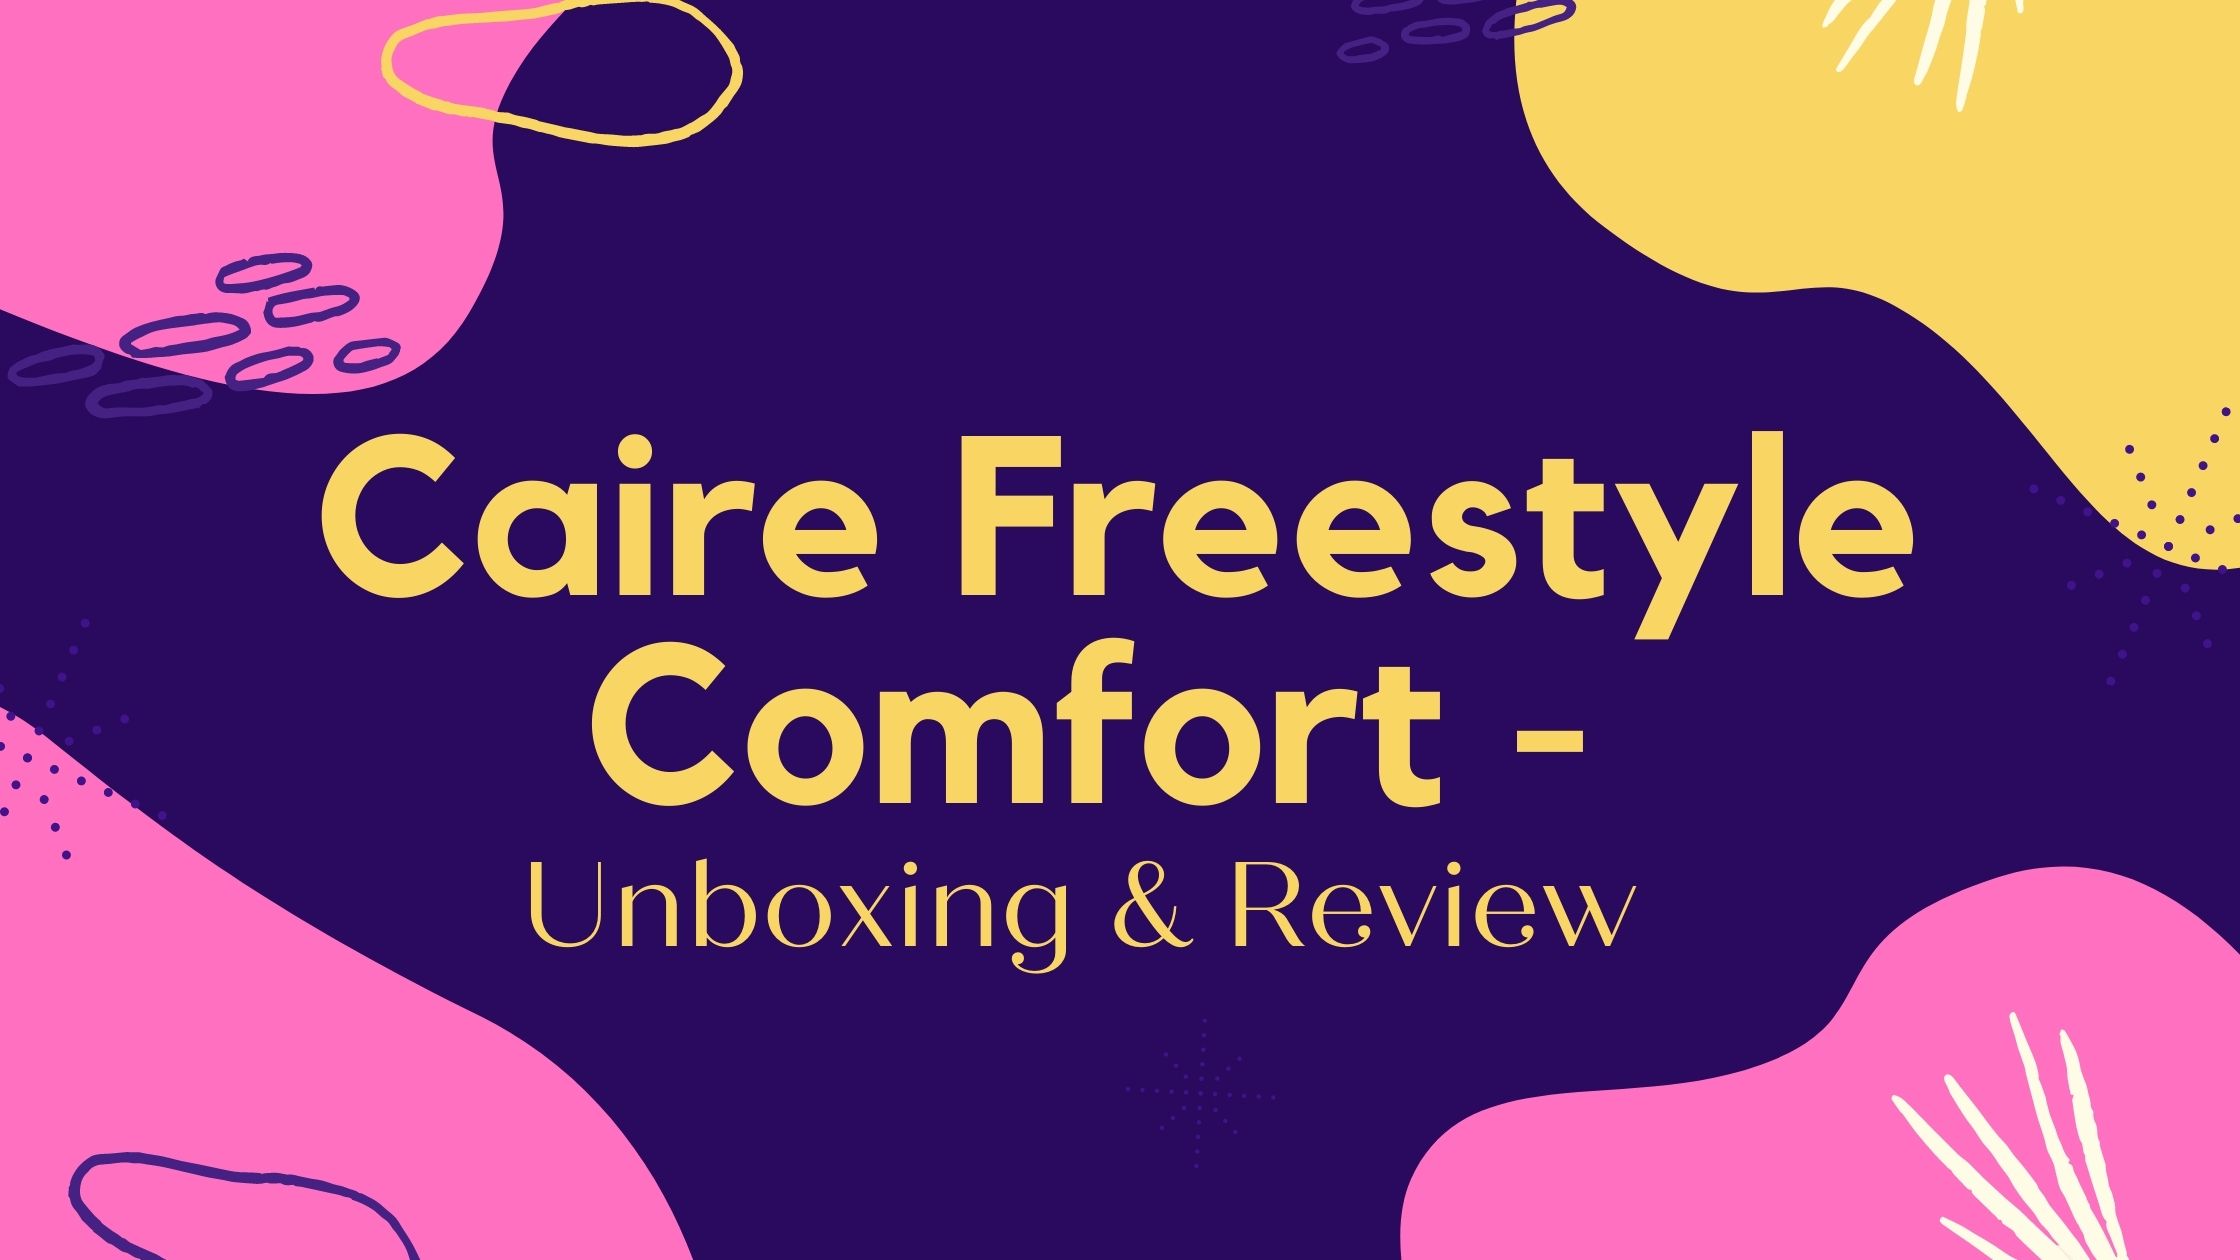 Caire Freestyle Comfort - Unboxing & Review